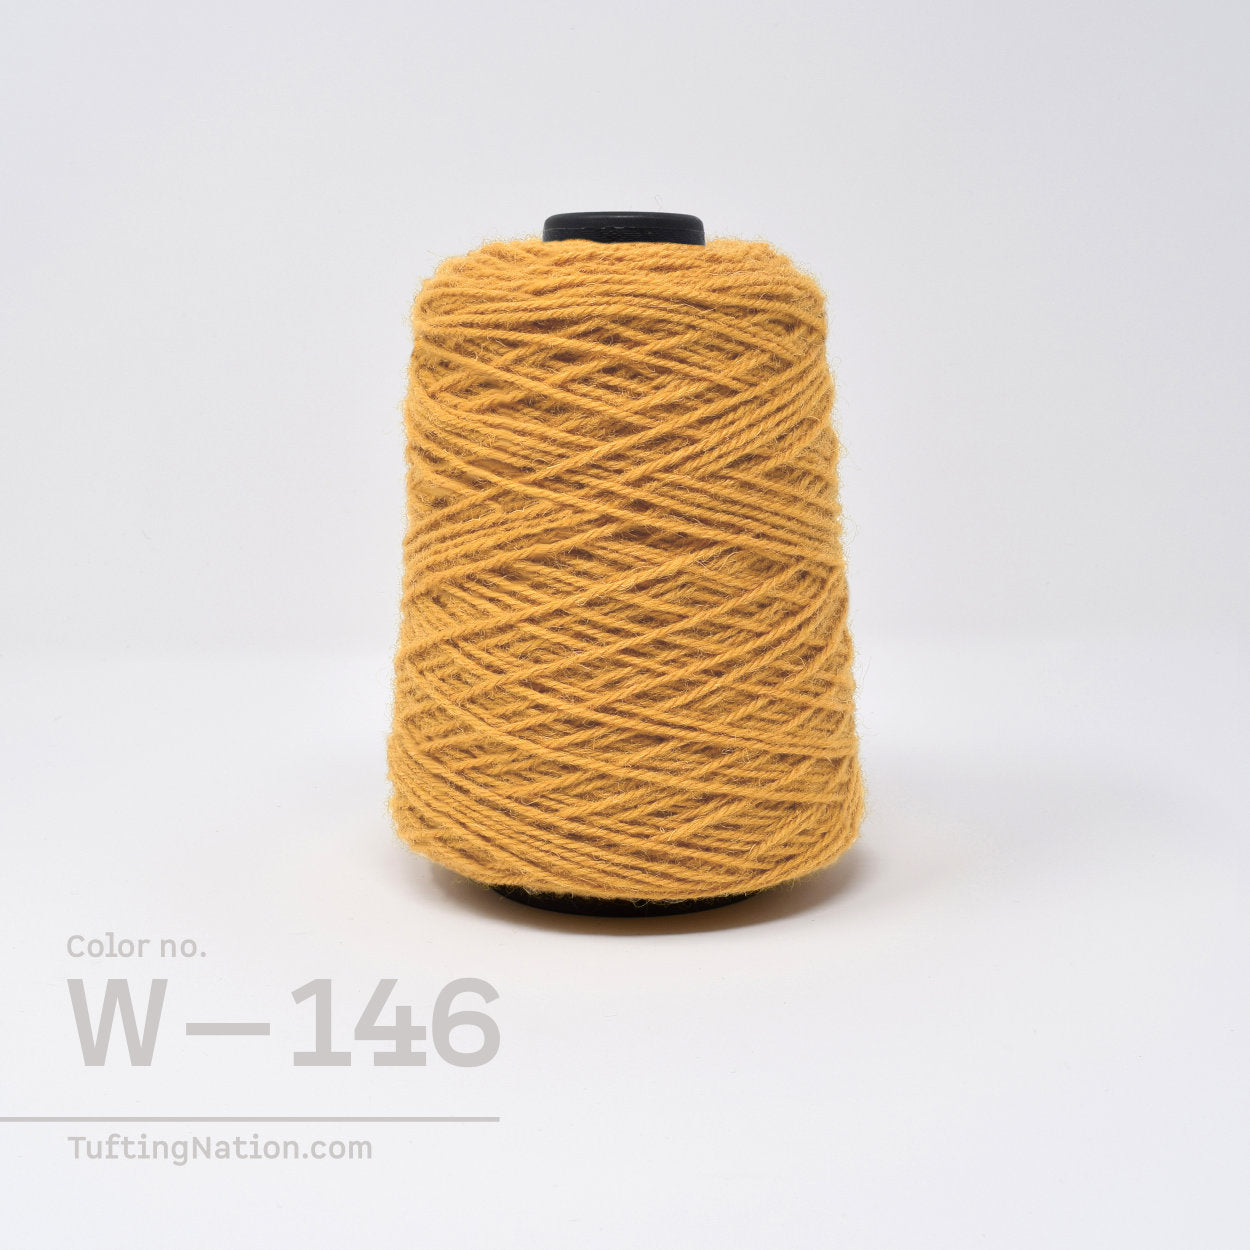 Gold Tufting Yarn On Spool for Rug Tufting, Weaving and Punch Needle | TuftingNation